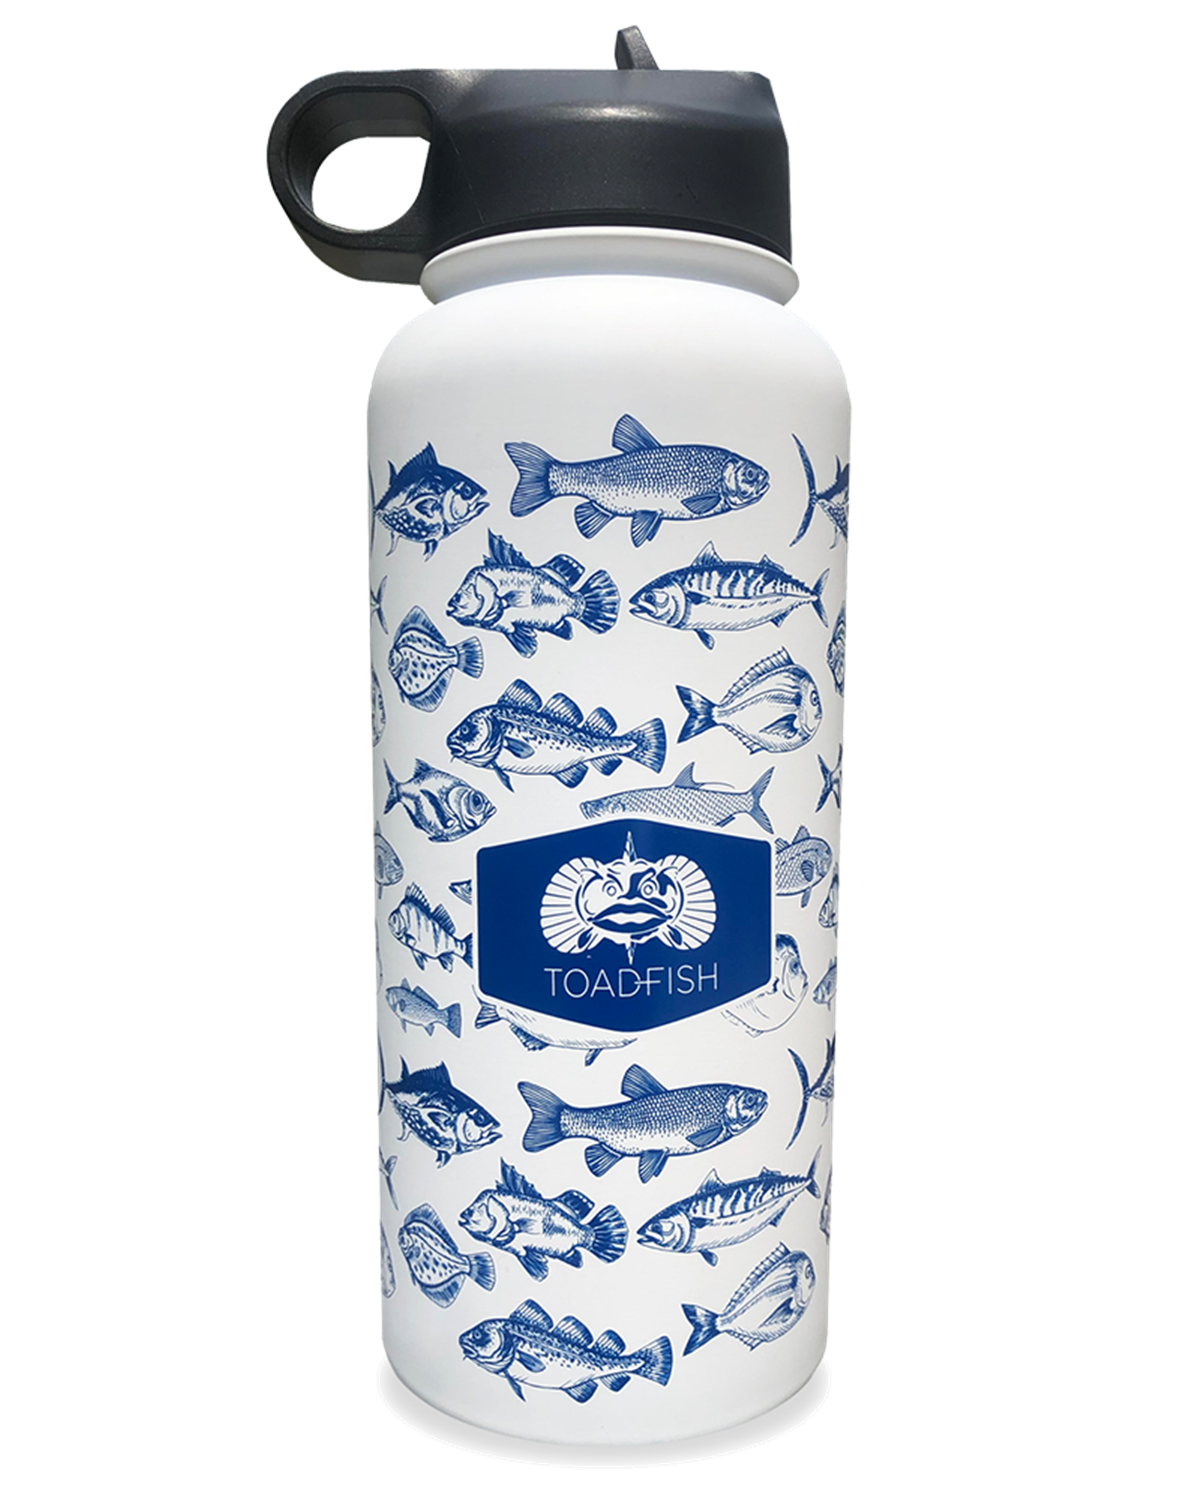 Toadfish 32oz Insulated Stainless Steel Eco-Canteen Water Bottle